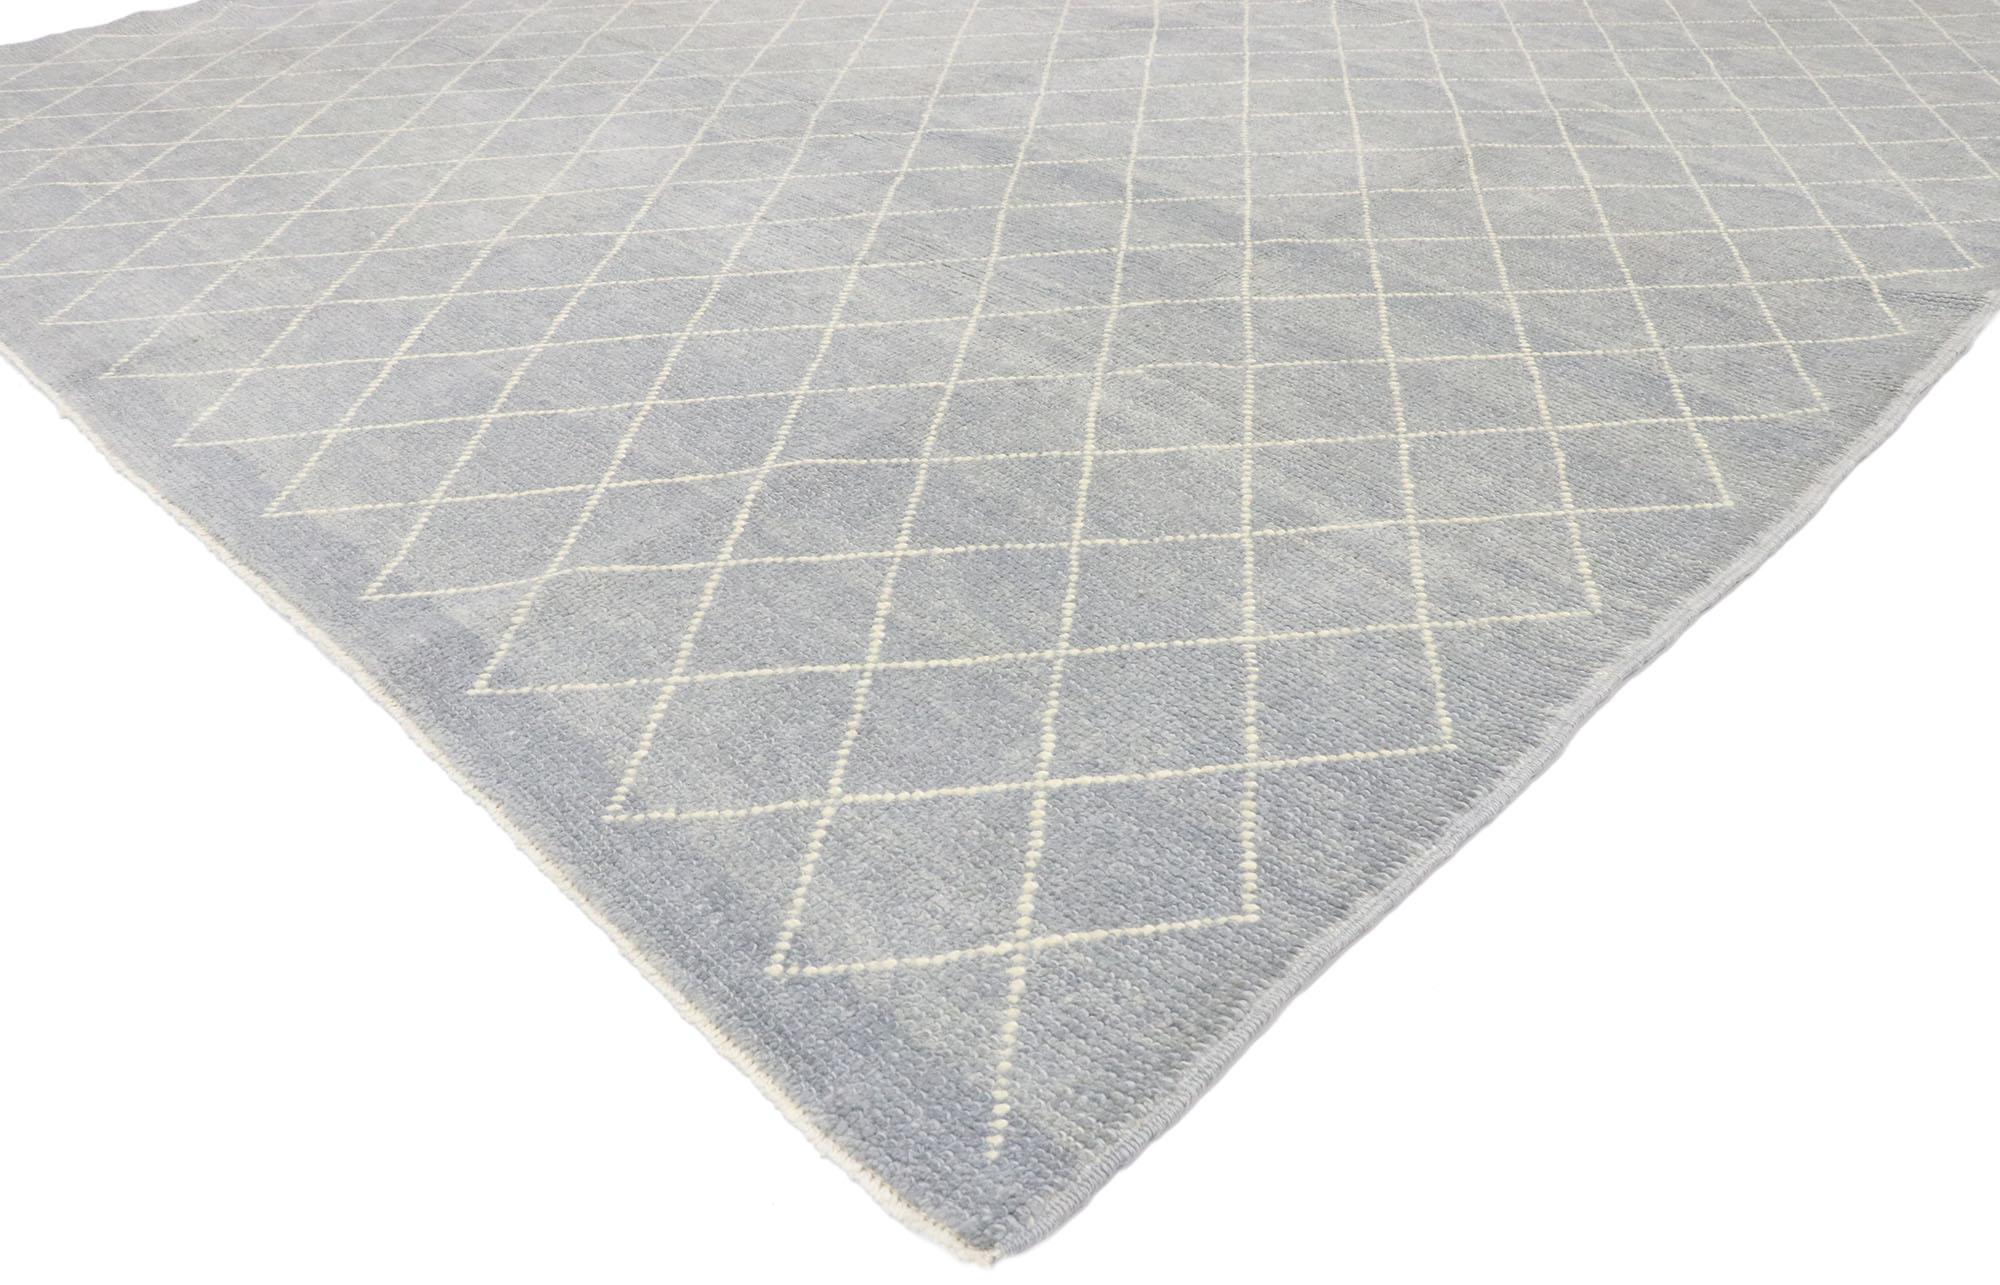 53446, new contemporary Moroccan style rug with Diamond Trellis. Simplicity meets incredible detail and texture in this hand knotted wool contemporary Moroccan rug. The abrashed pale bluish-grey field is covered in a diamond trellis comprised of